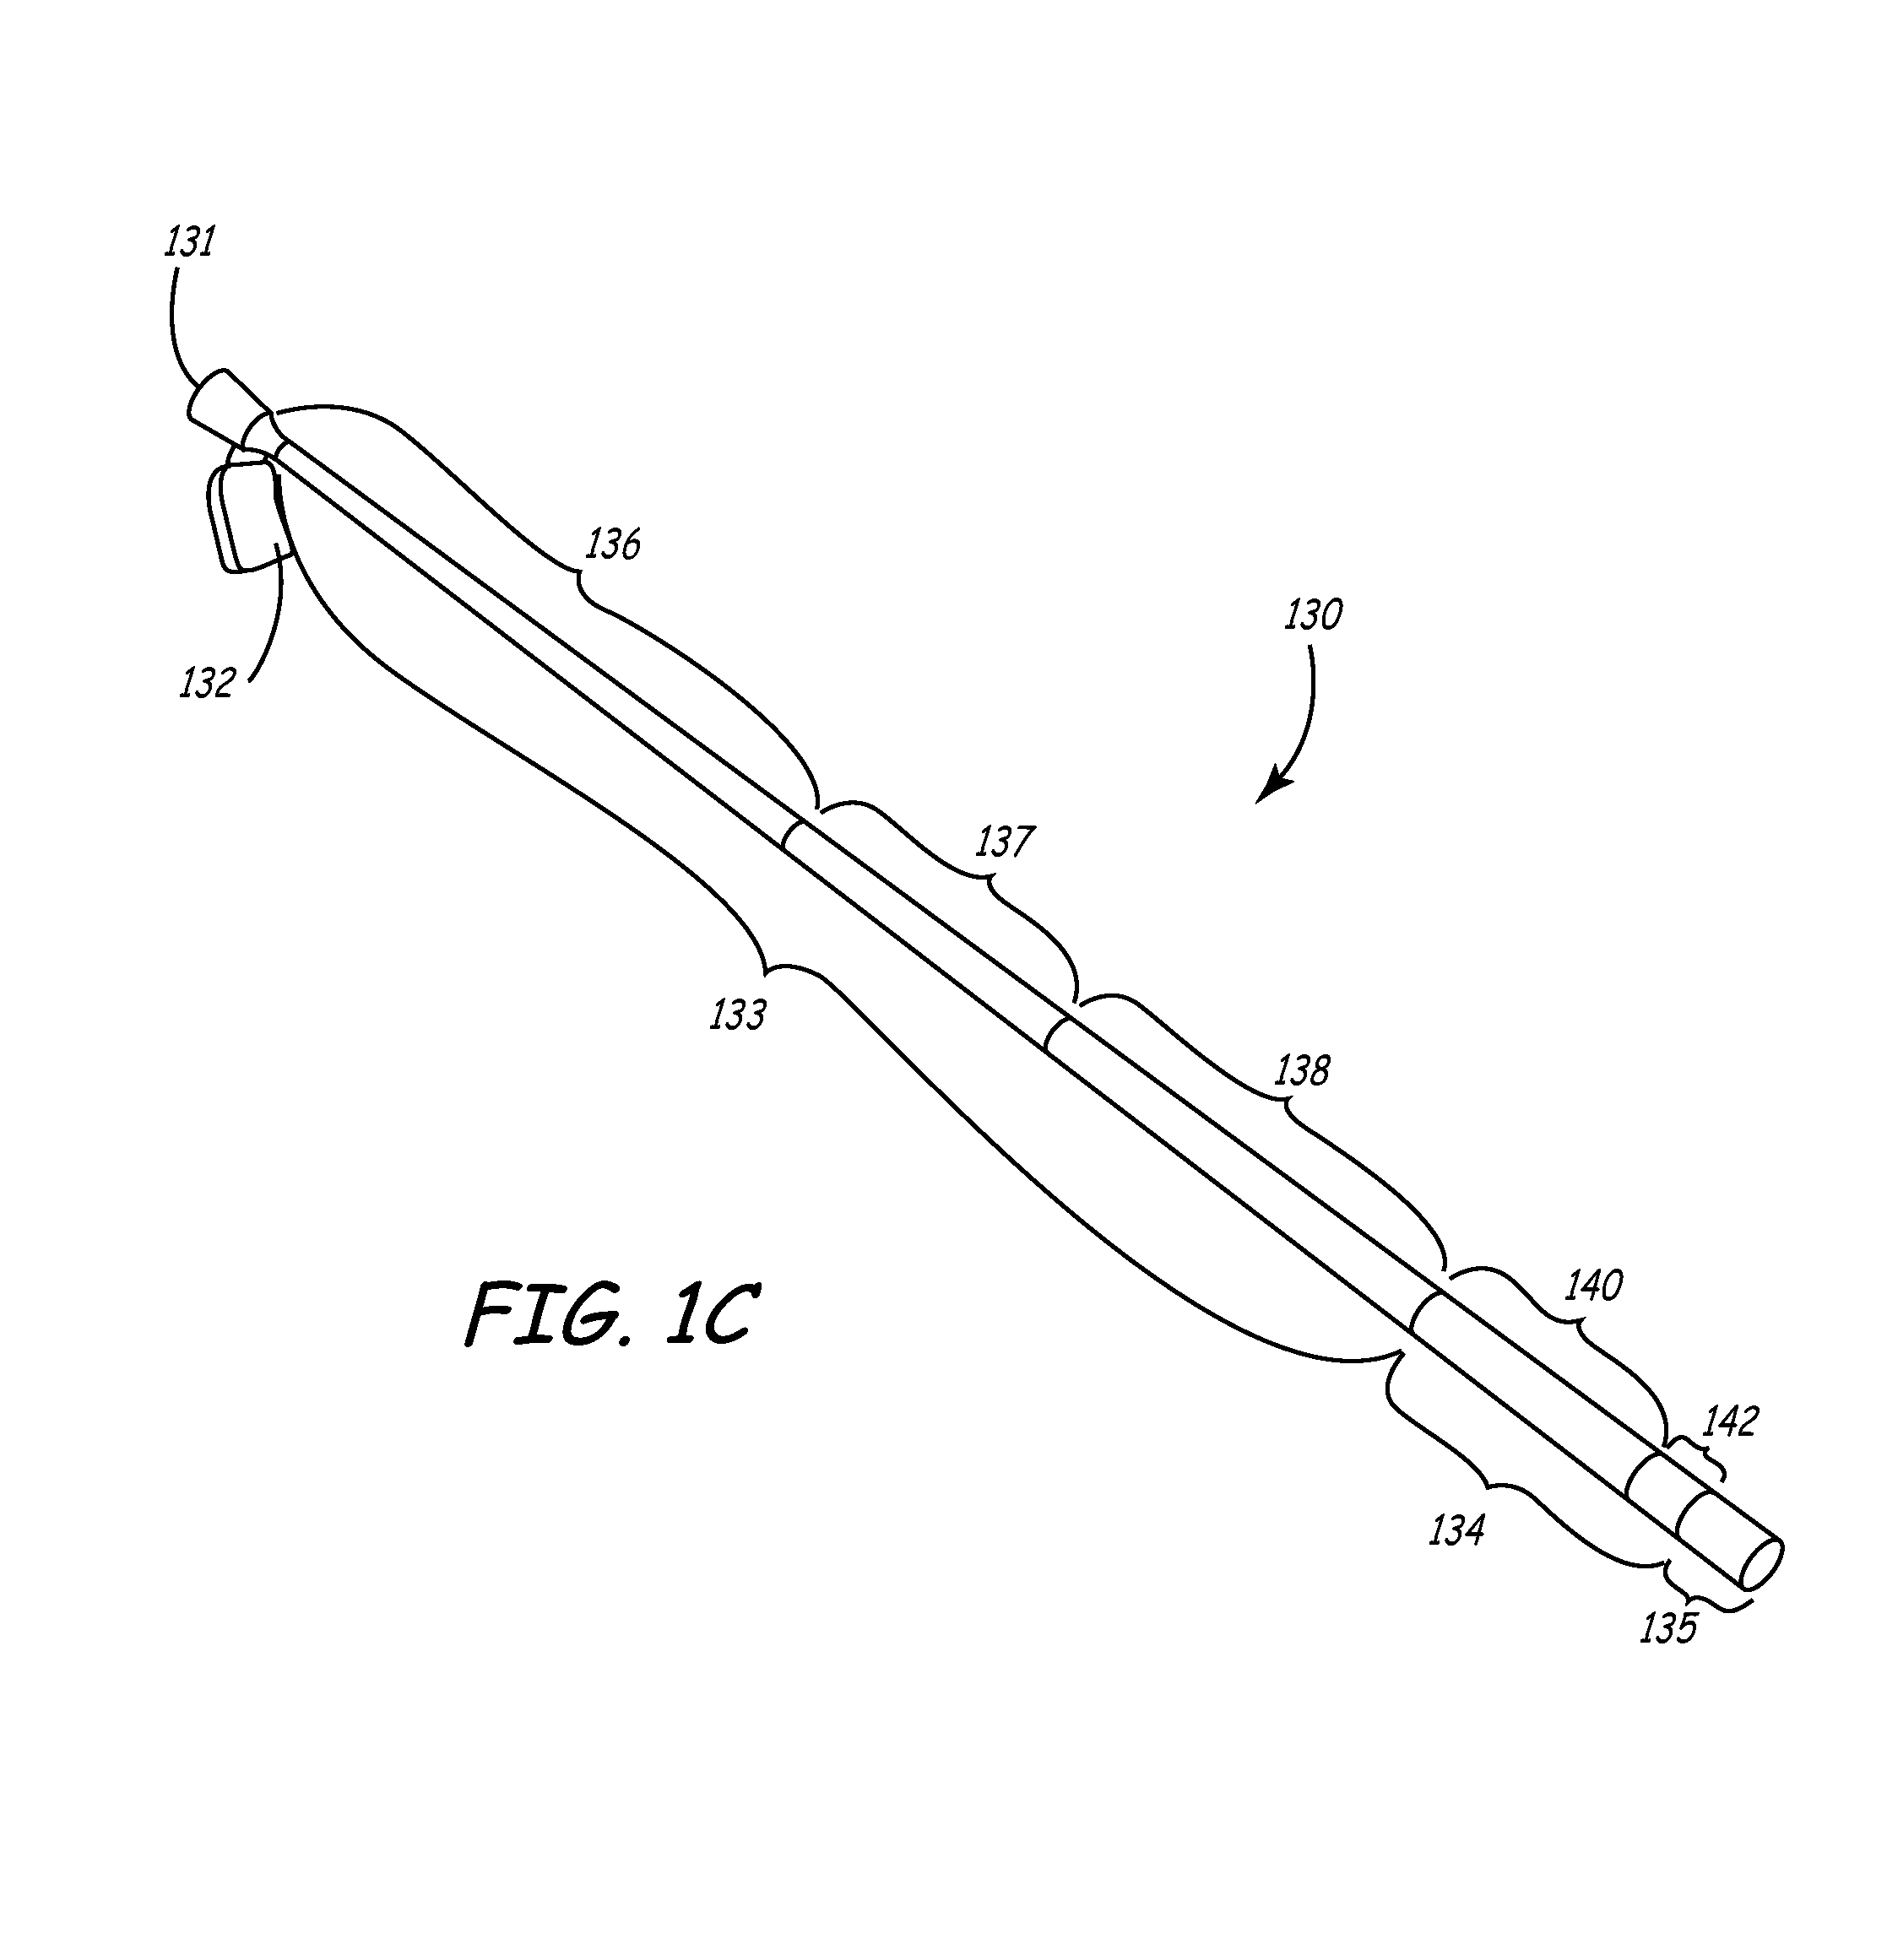 System and method for positioning implantable medical devices within coronary veins